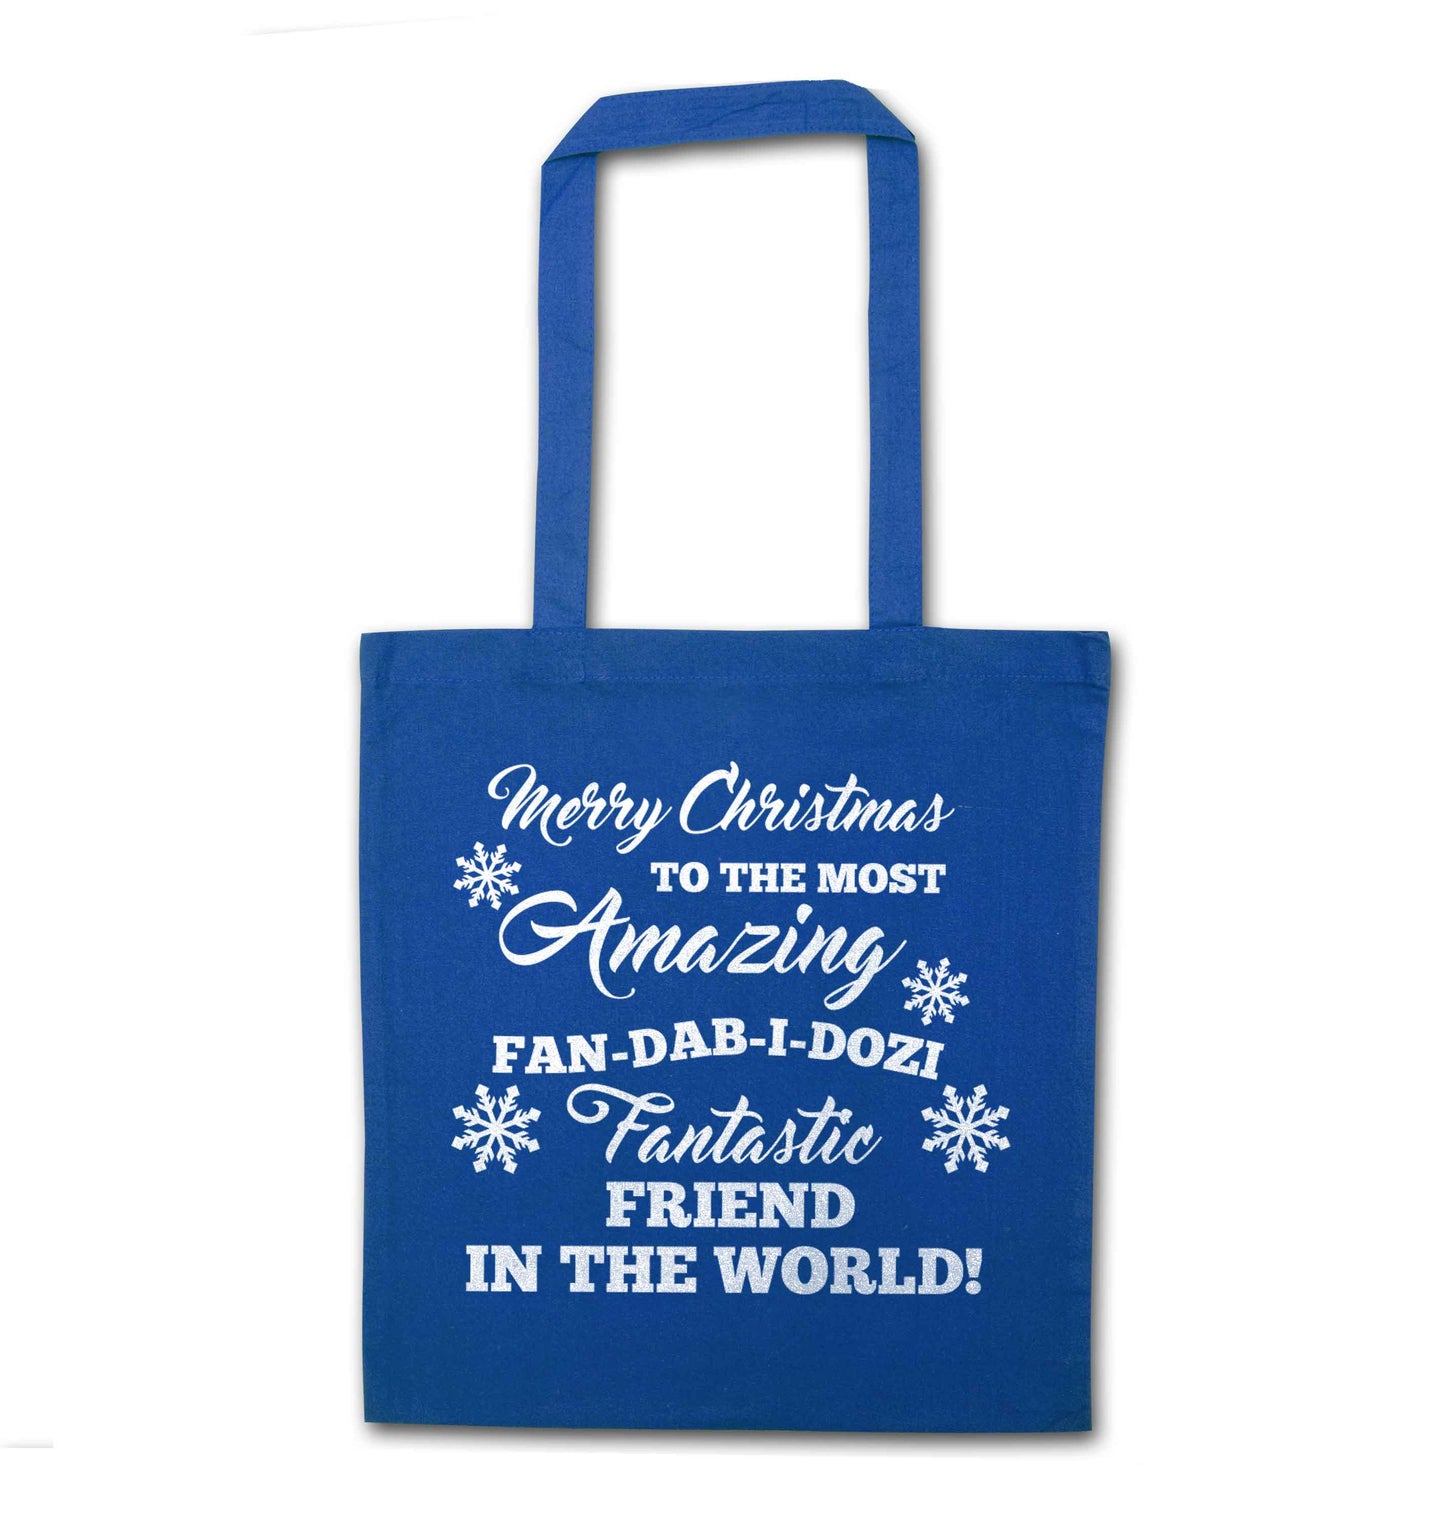 Merry Christmas to the most amazing fan-dab-i-dozi fantasic friend in the world blue tote bag